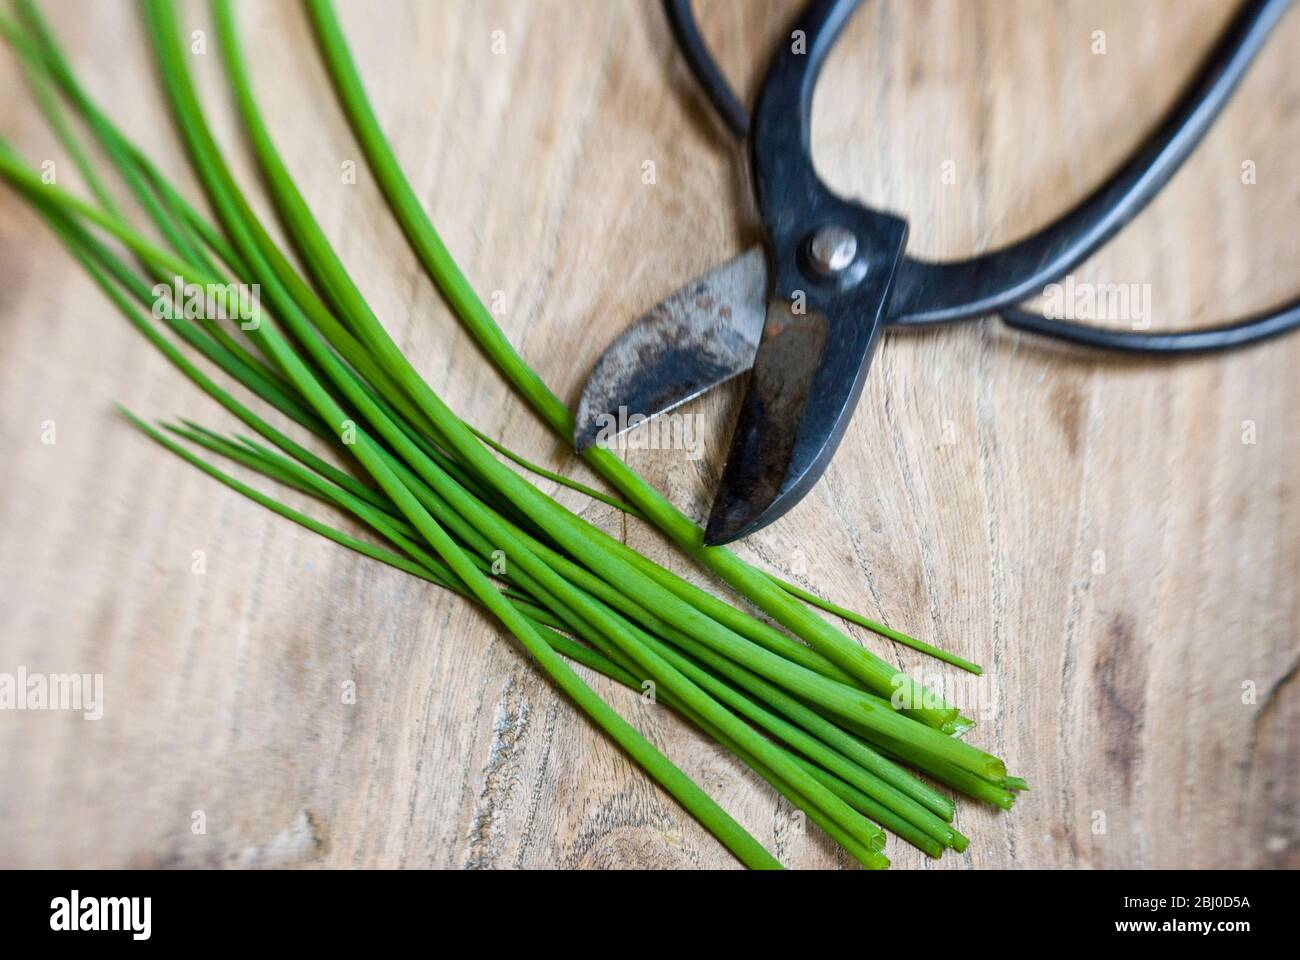 Cut chives on wooden surface with Japanese scissors - Stock Photo